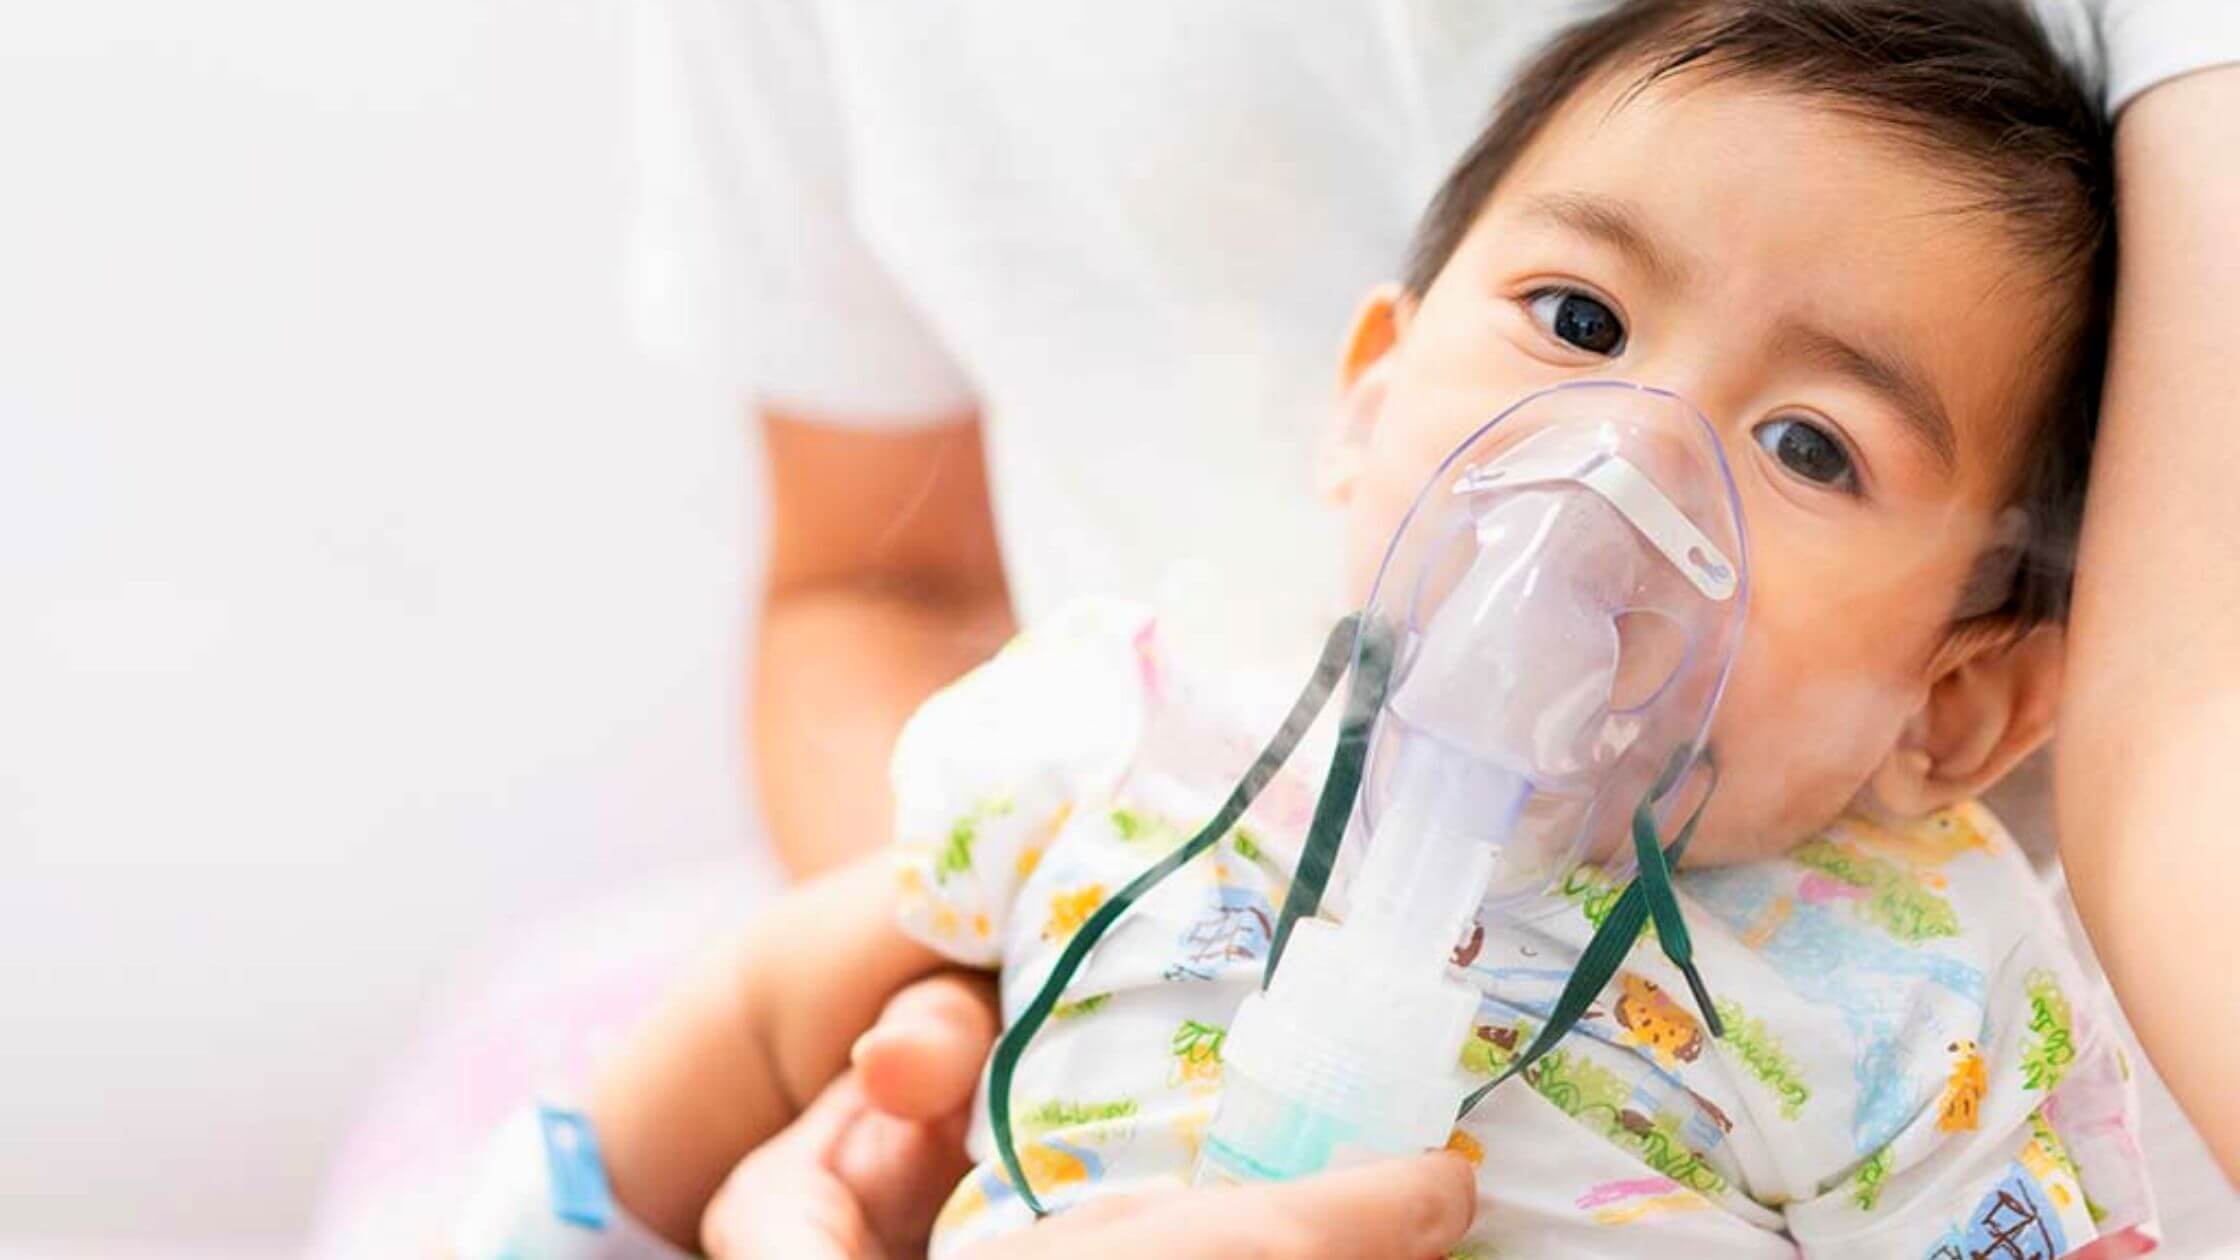 Respiratory Syncytial Virus In Children- Parents Should Be Cautious 